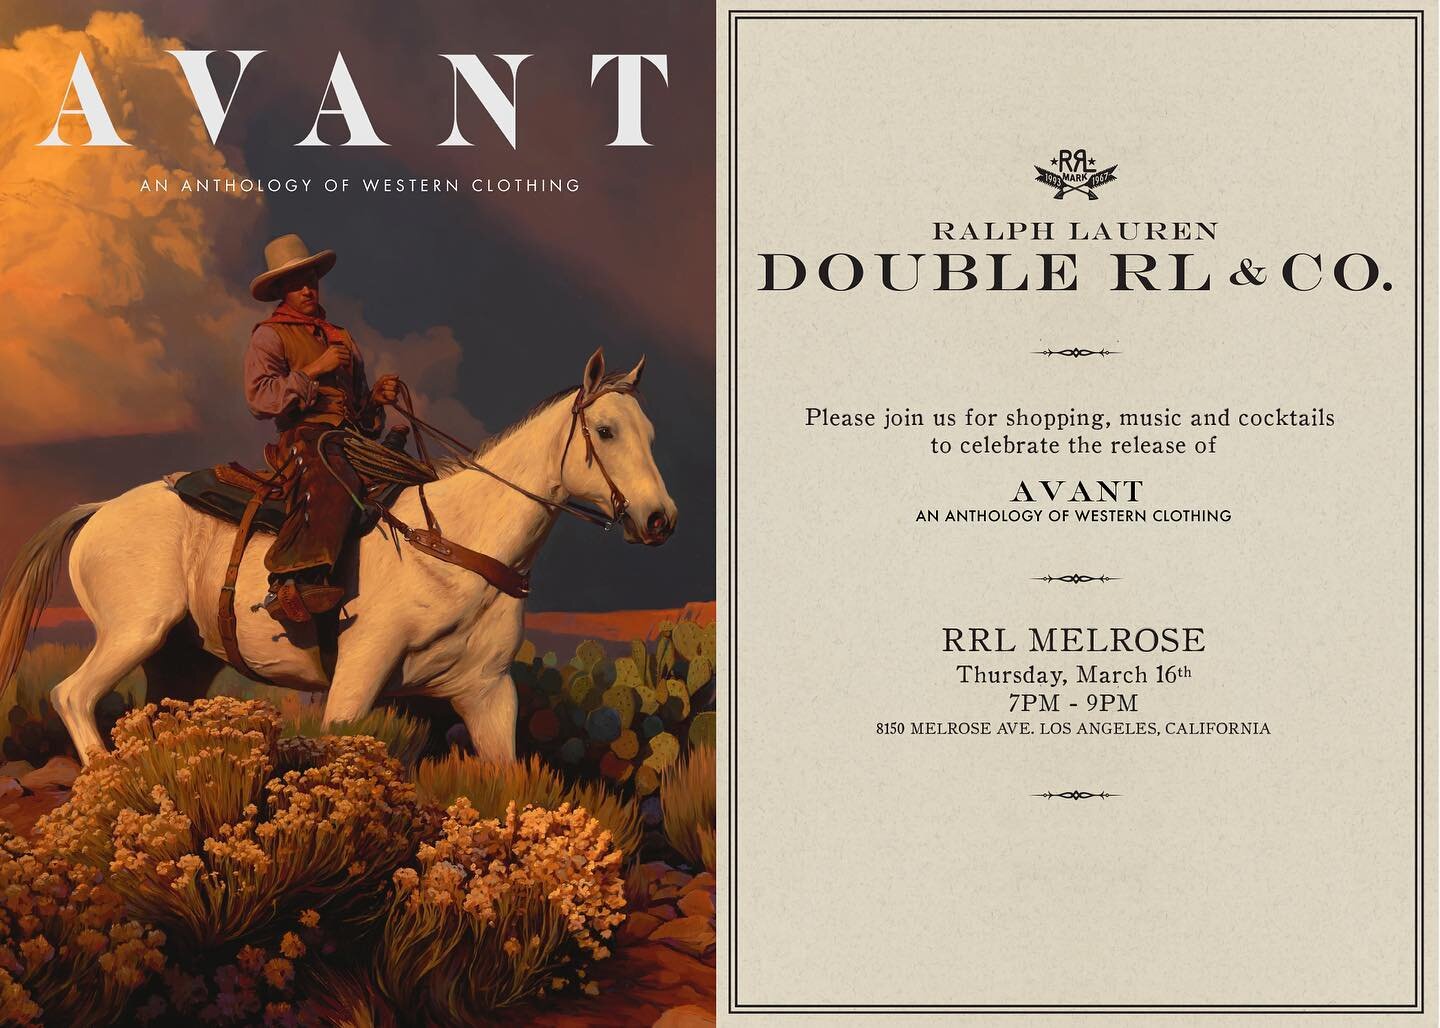 Tonight !! 
Come join us at RRL Store on Melrose to celebrate Western wear and vintage clothing ! No list, just come and say hi that&rsquo;s gonna be a lot of fun ! See you, 7 pm !
#avant #avantmagazine #ralphlauren #rrl #doublerl #westernwear #weste